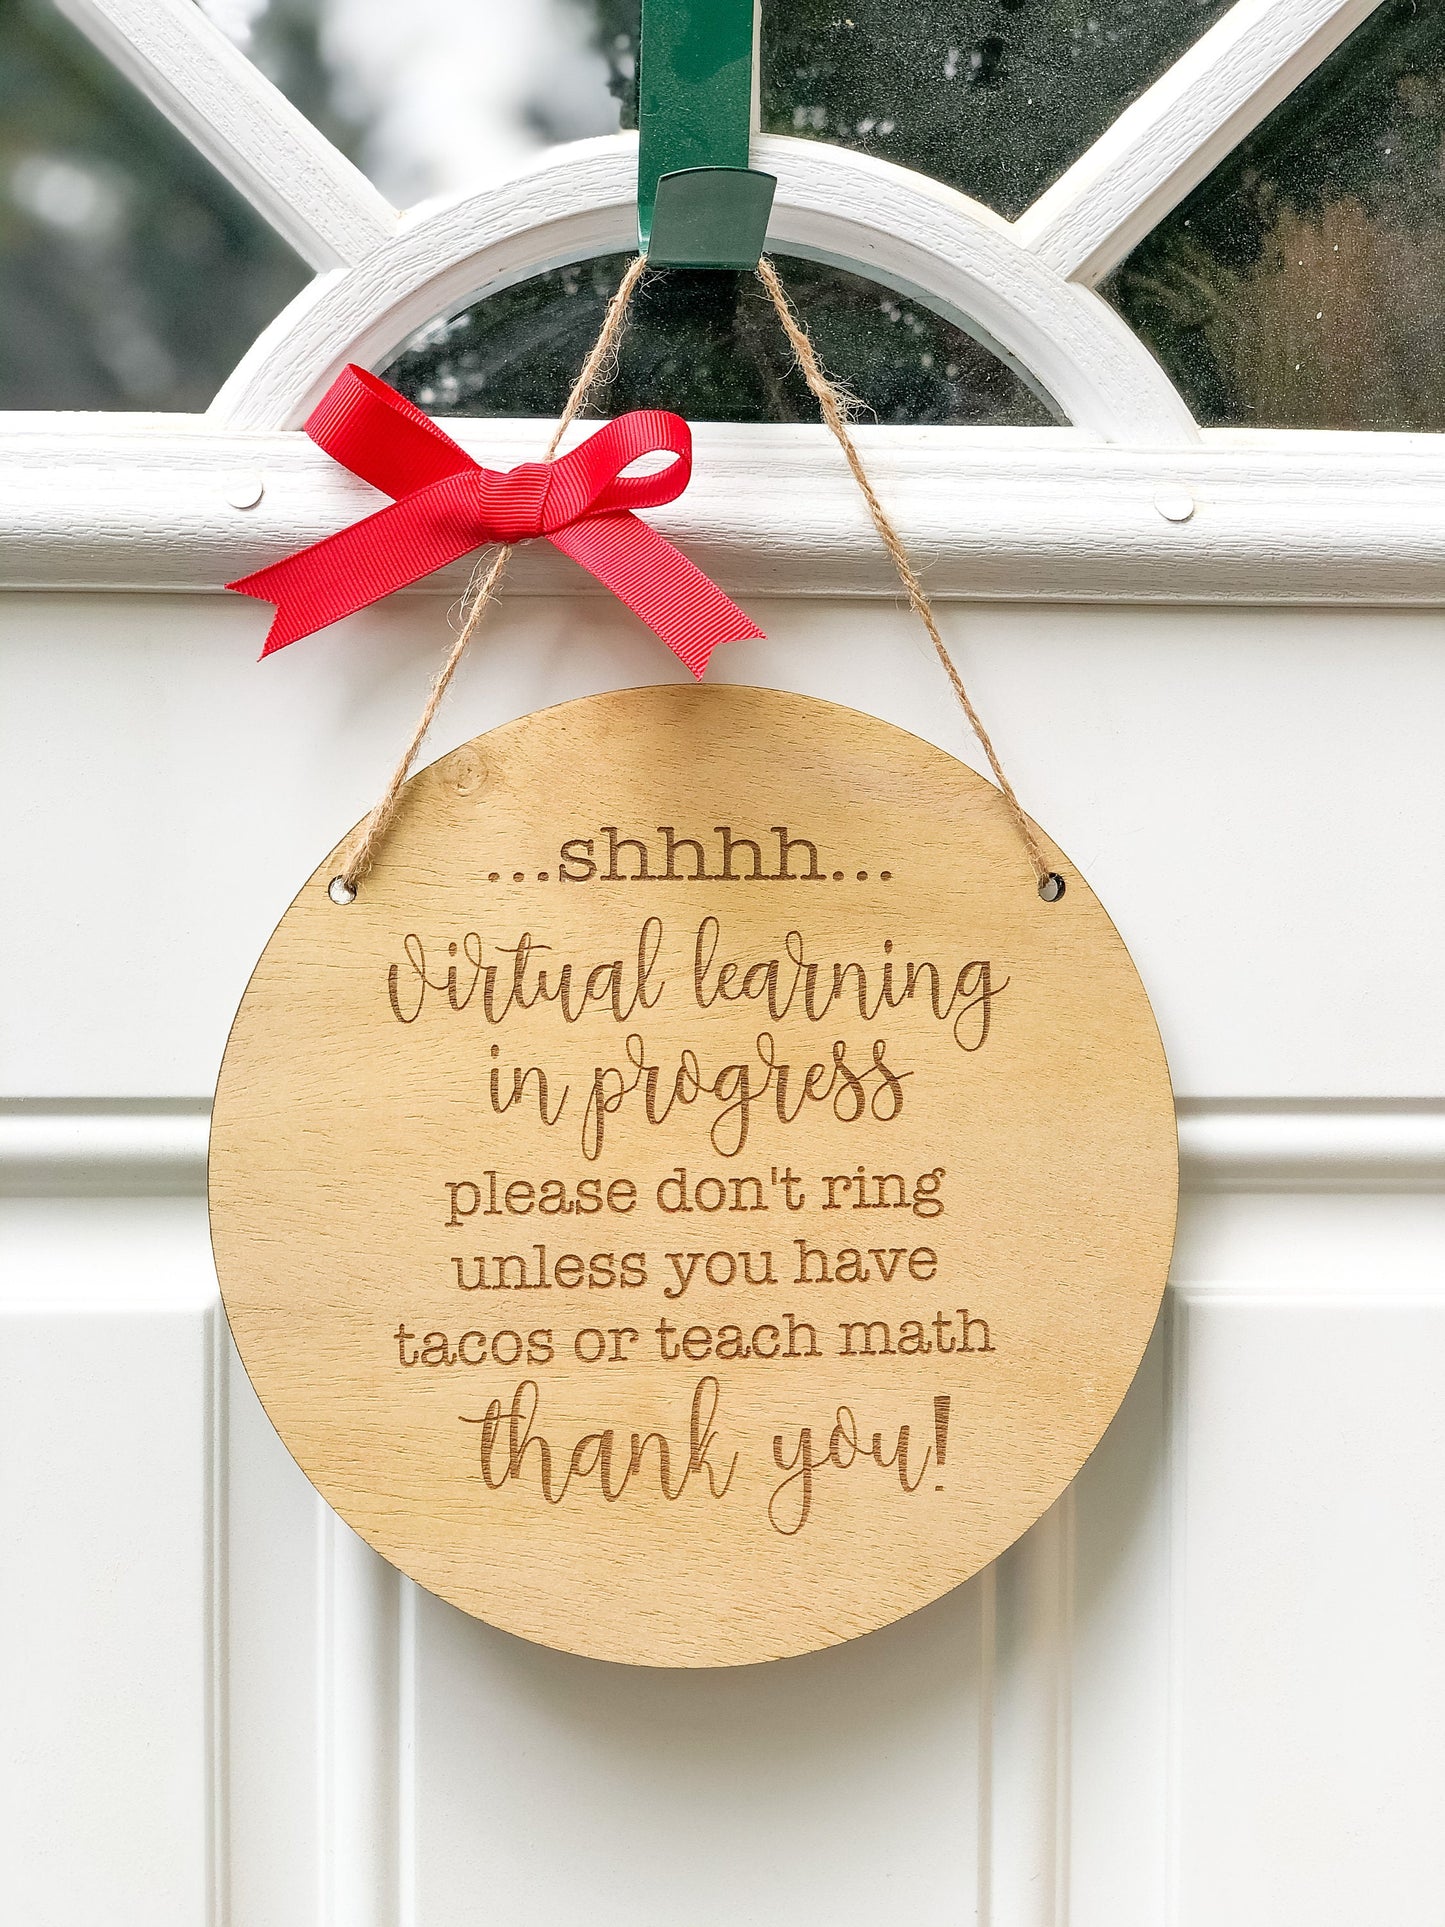 Virtual Learning Door Hanger -E-Learning In Progress - Homeschool Decor - Please Don't Knock - No Soliciting Sign